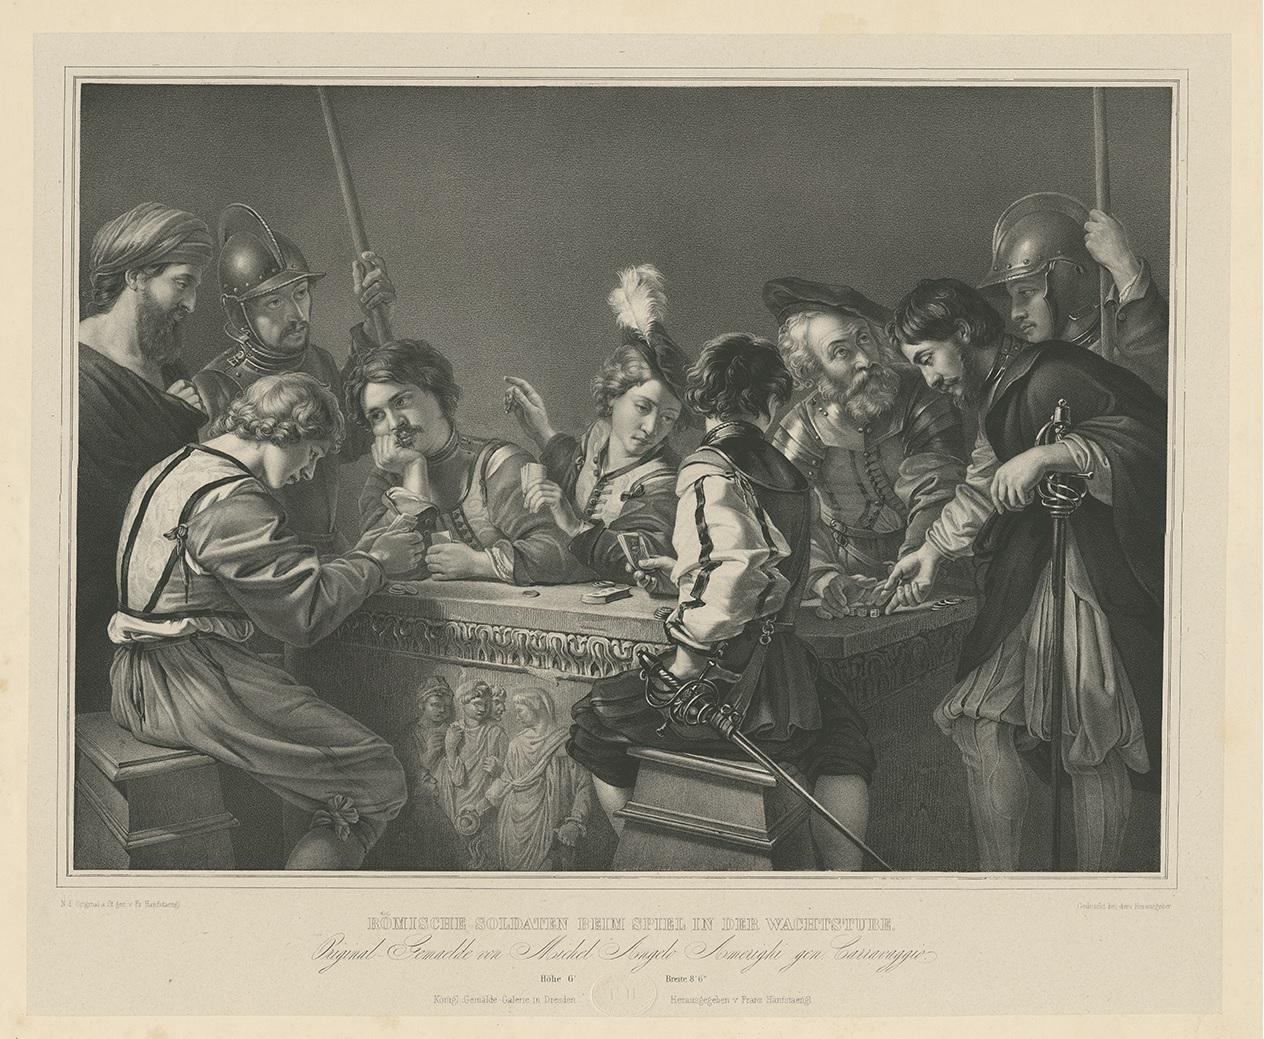 Antique print titled 'Römische Soldaten beim Spiel in der Wachtstube'. Lithograph, on chine collé, of a Caravaggio painting showing soldiers gambling. Published circa 1840.